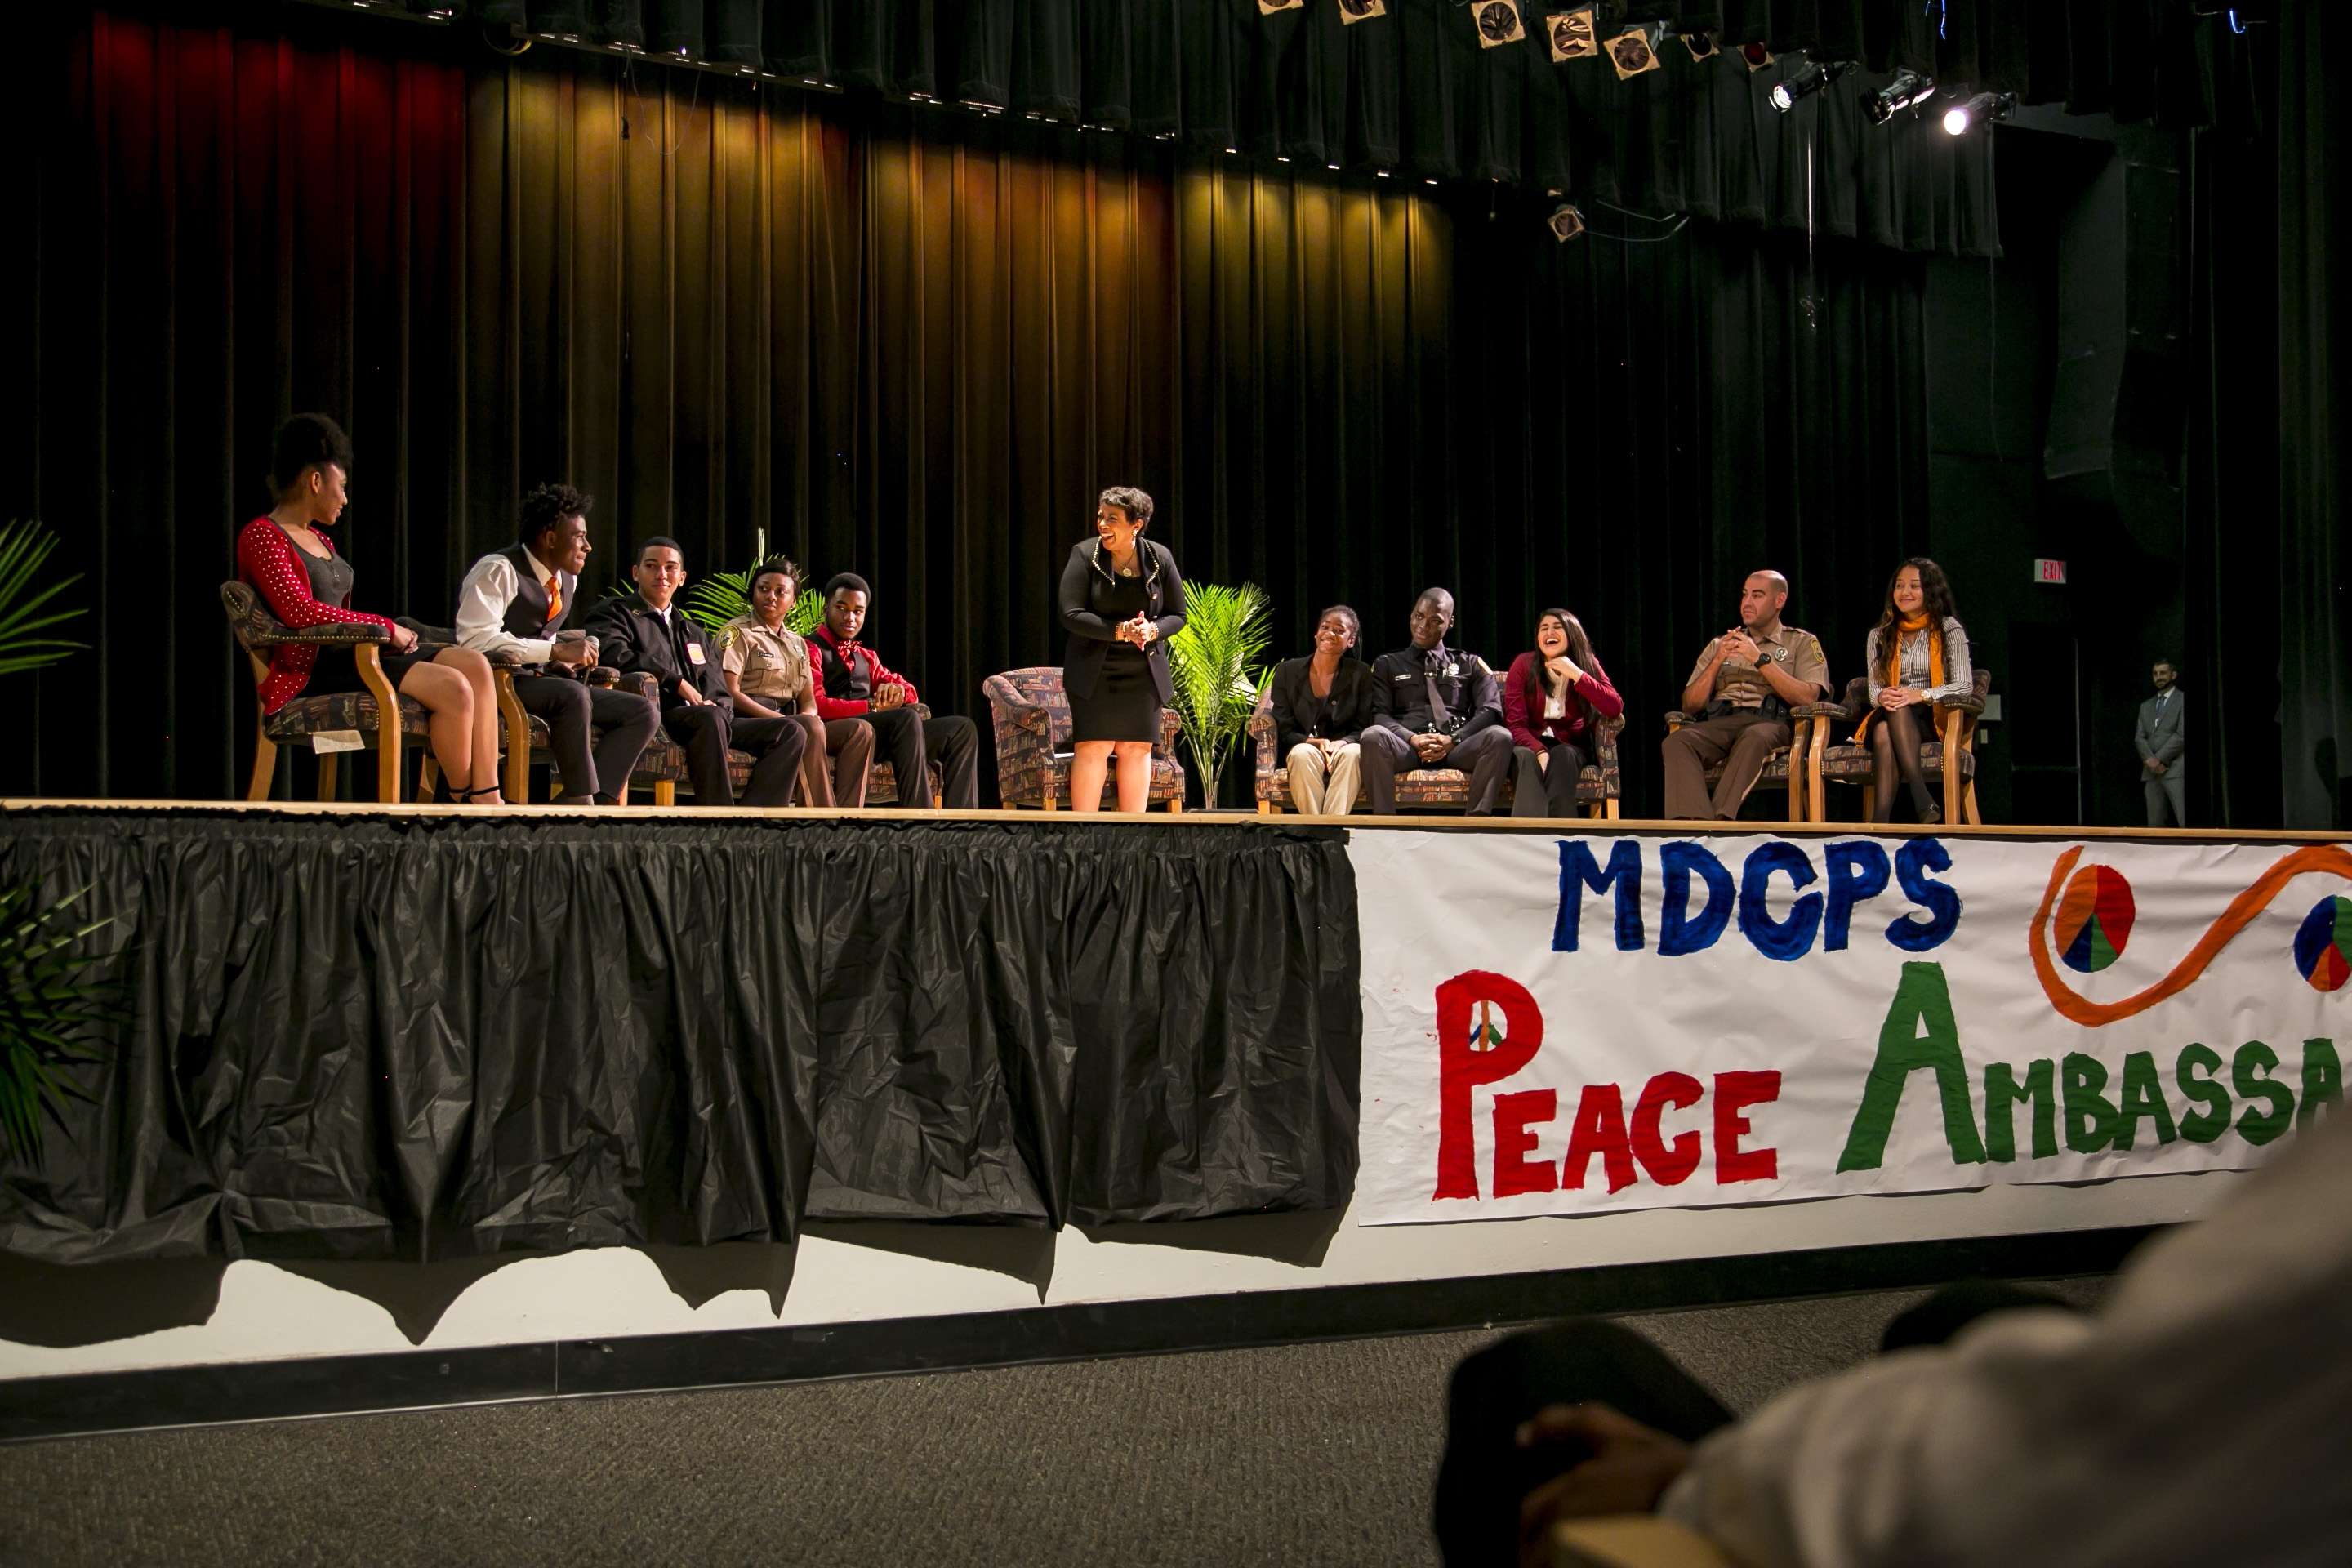 Attorney General Lynch, Student Peace Ambassadors, and officers discuss police-community relations at a youth down hall at Miami